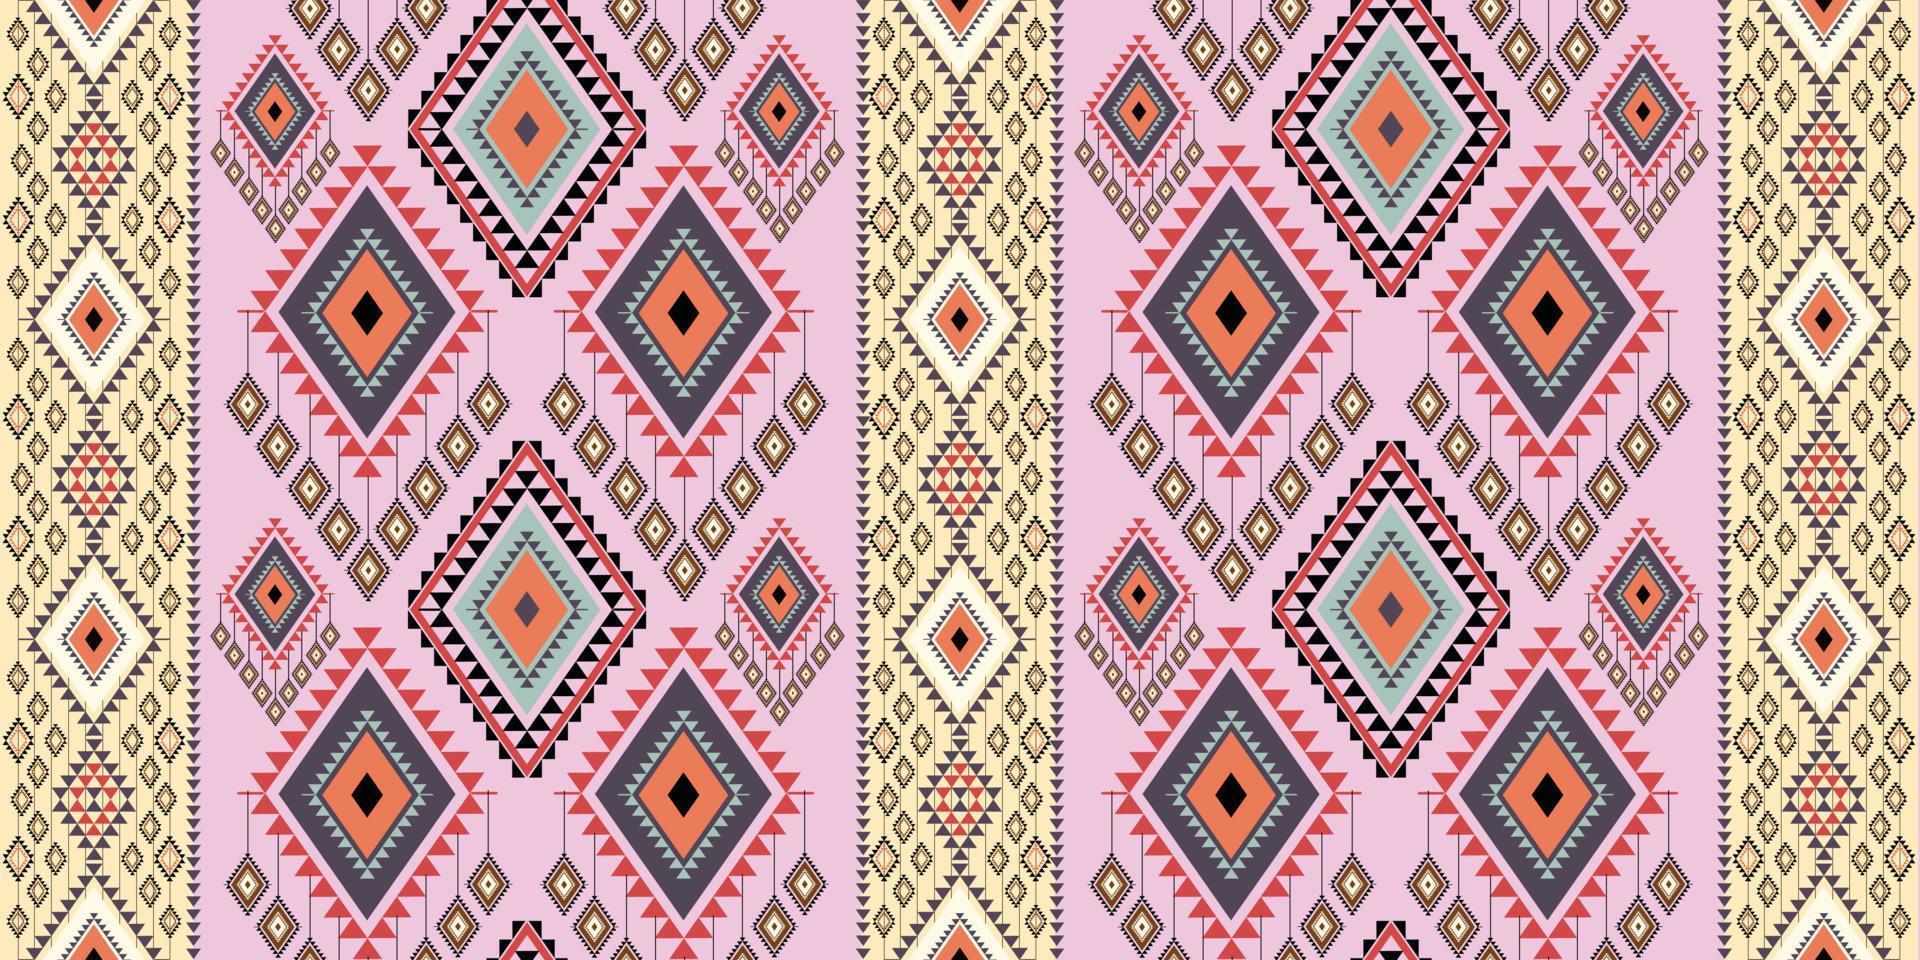 Ethnic geometric oriental and western pattern. American, Aztec,motif,tribal, textile pattern. design for fabric,curtain, background, carpet, wallpaper, clothing,wrapping,tile.textile Motif vector. vector